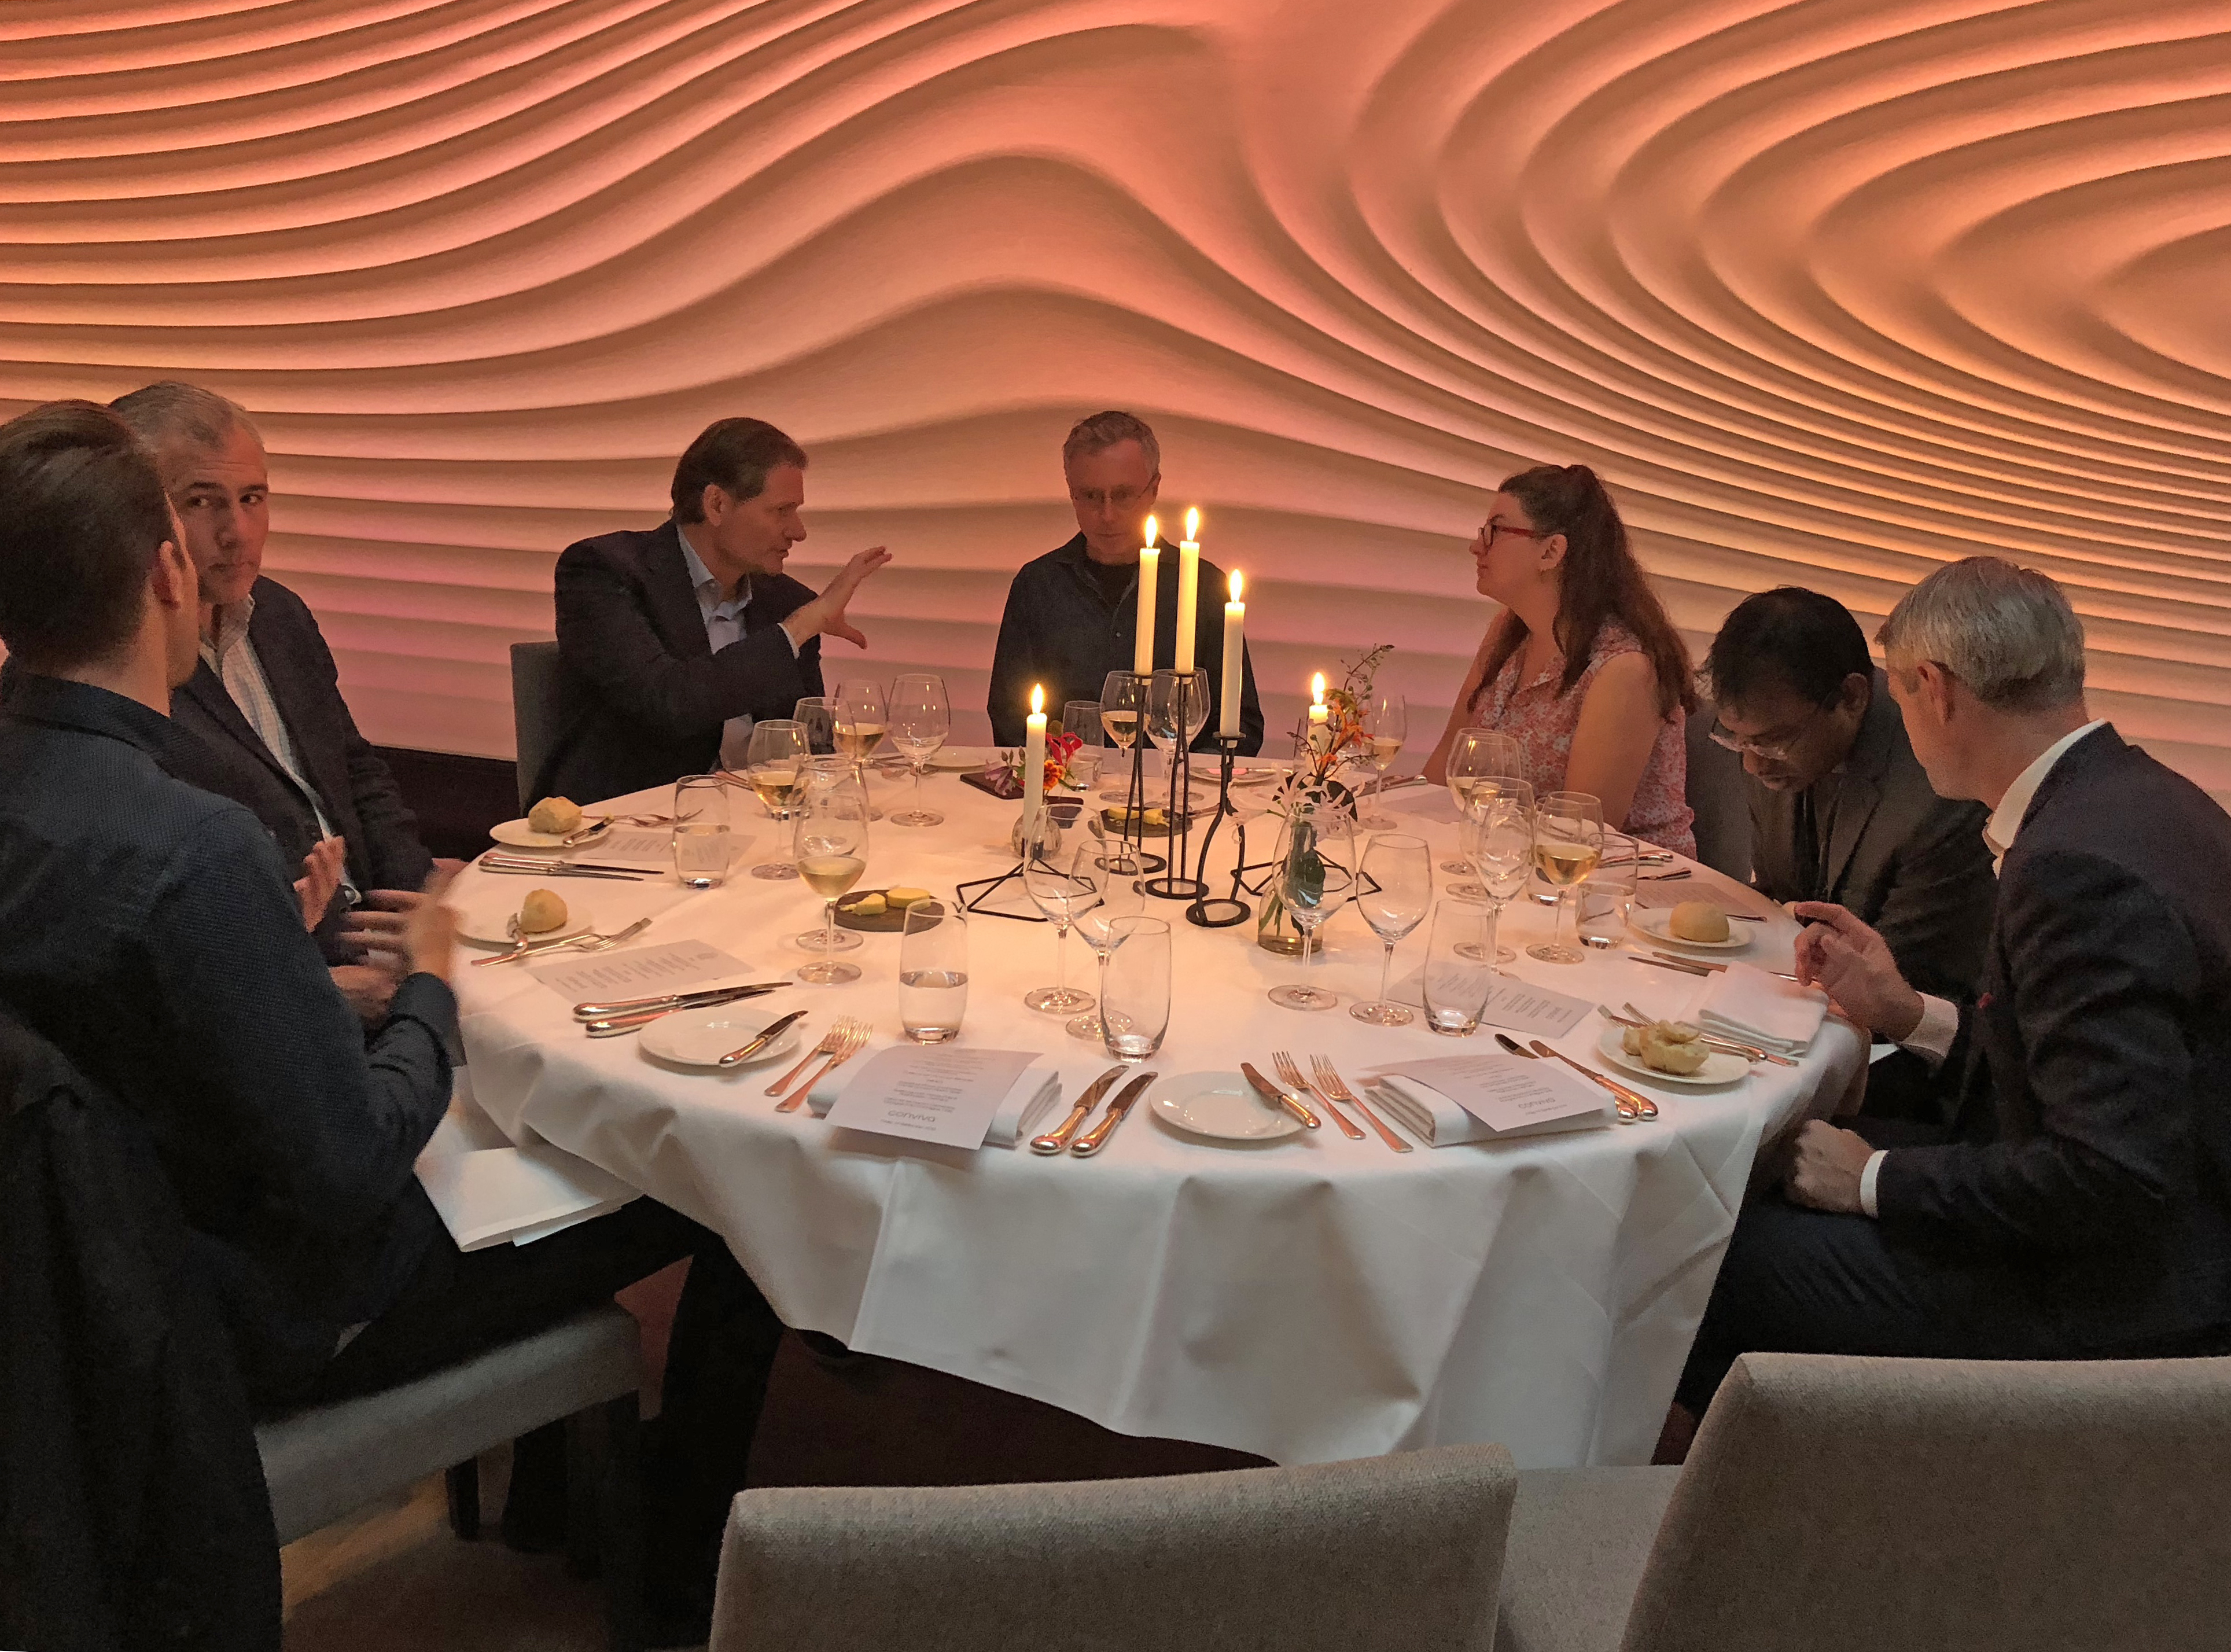 Conviva's Executive Taking Dinner Together To Celebrate Ibc Success